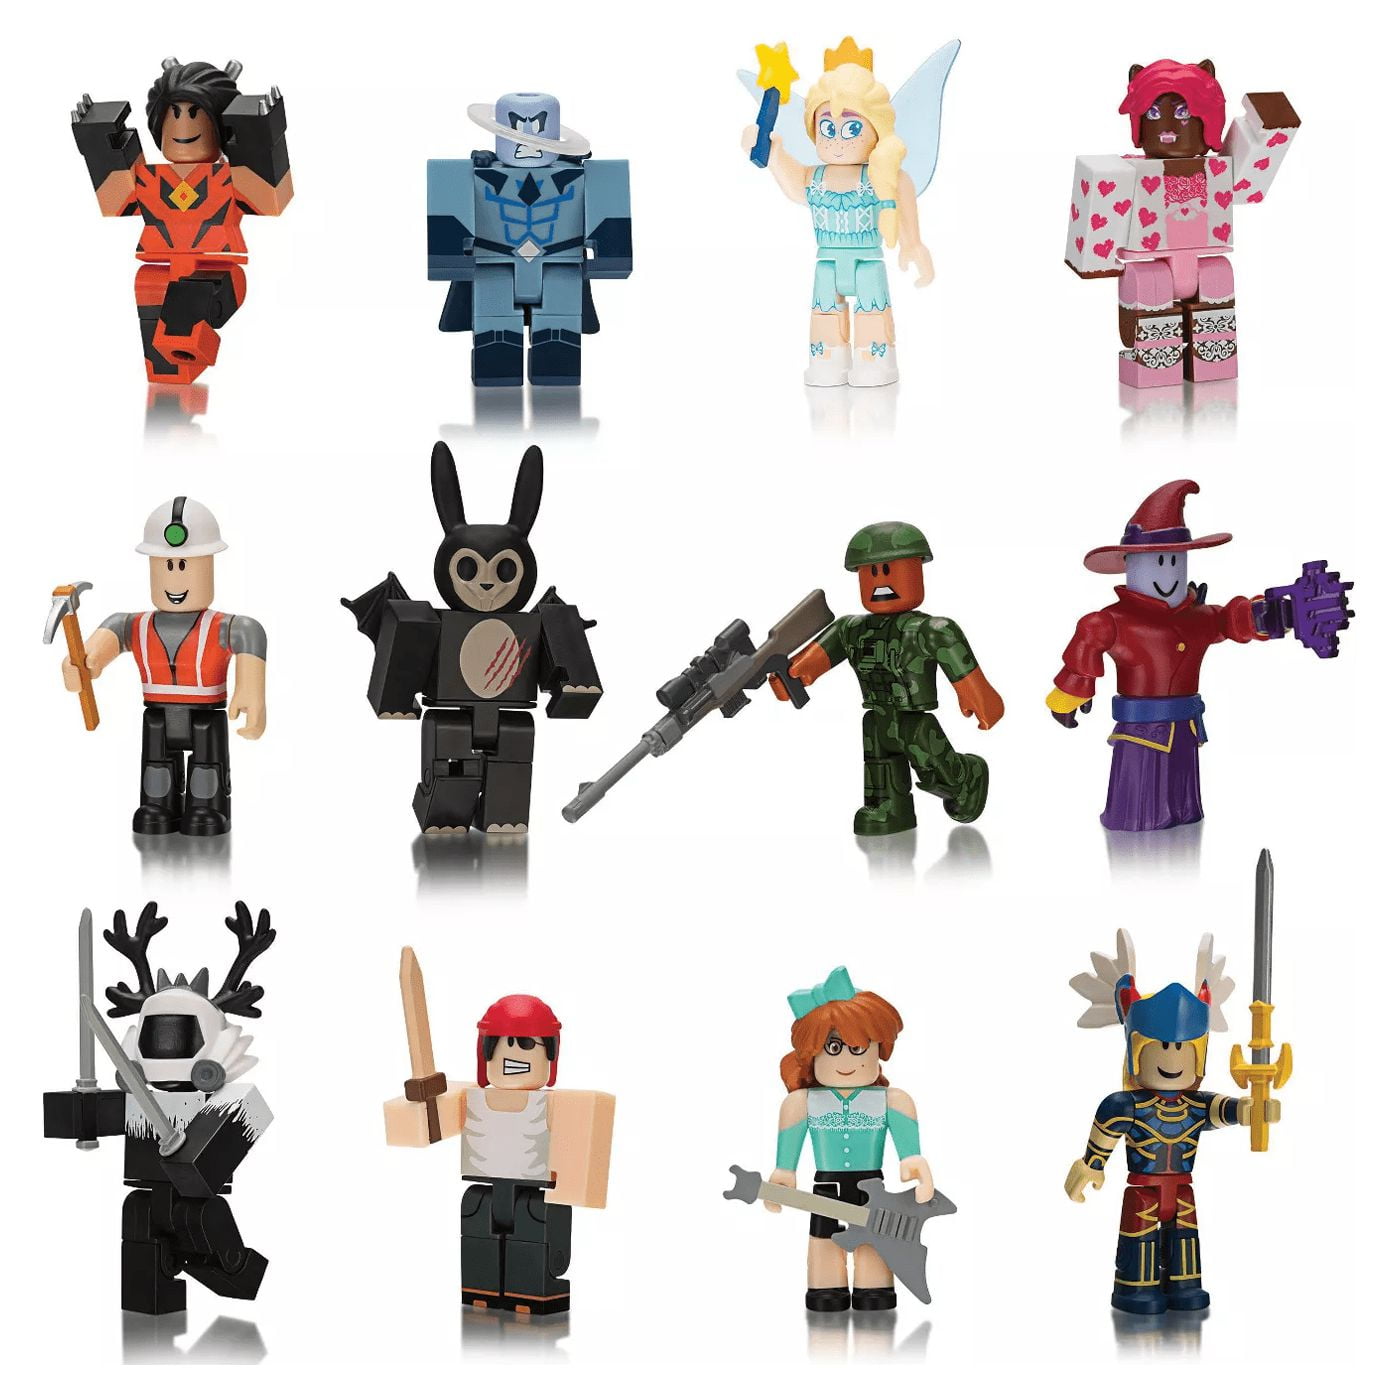 Roblox Celebrity Collection - Series 4 Figure 12pk (Roblox